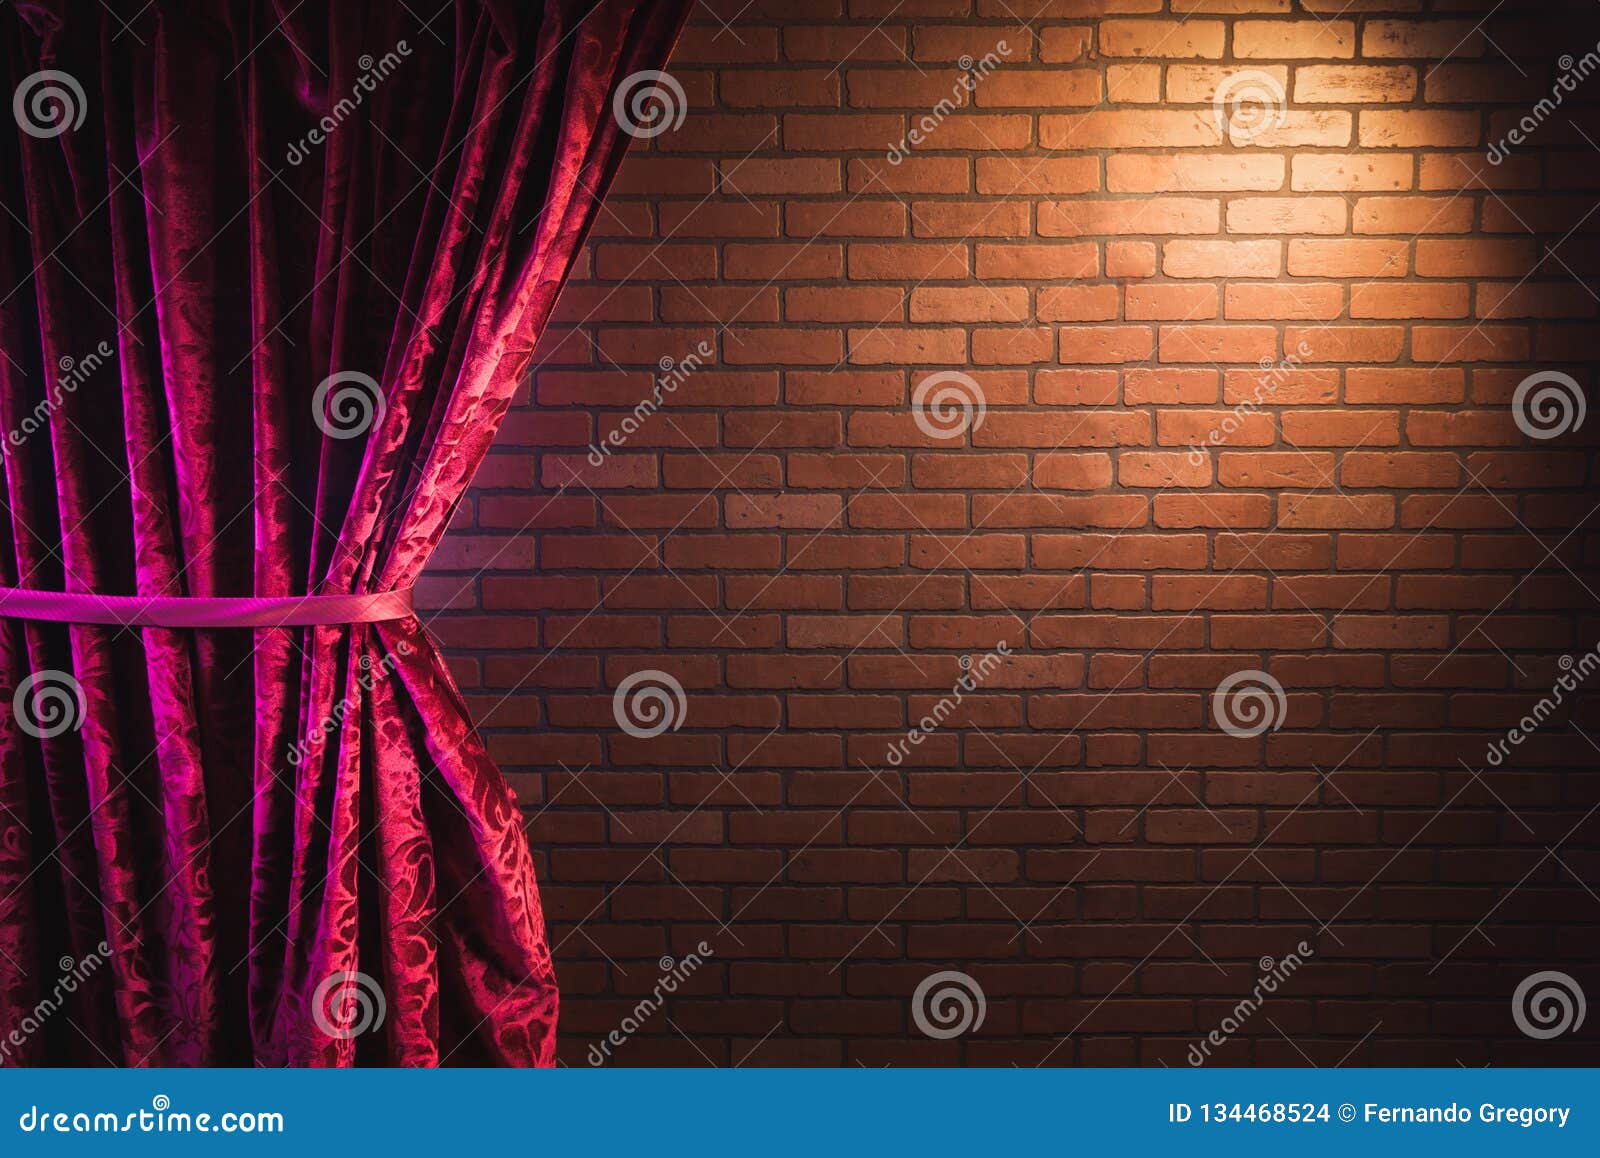 Brick wall and red curtain stock photo. Image of artist - 134468524